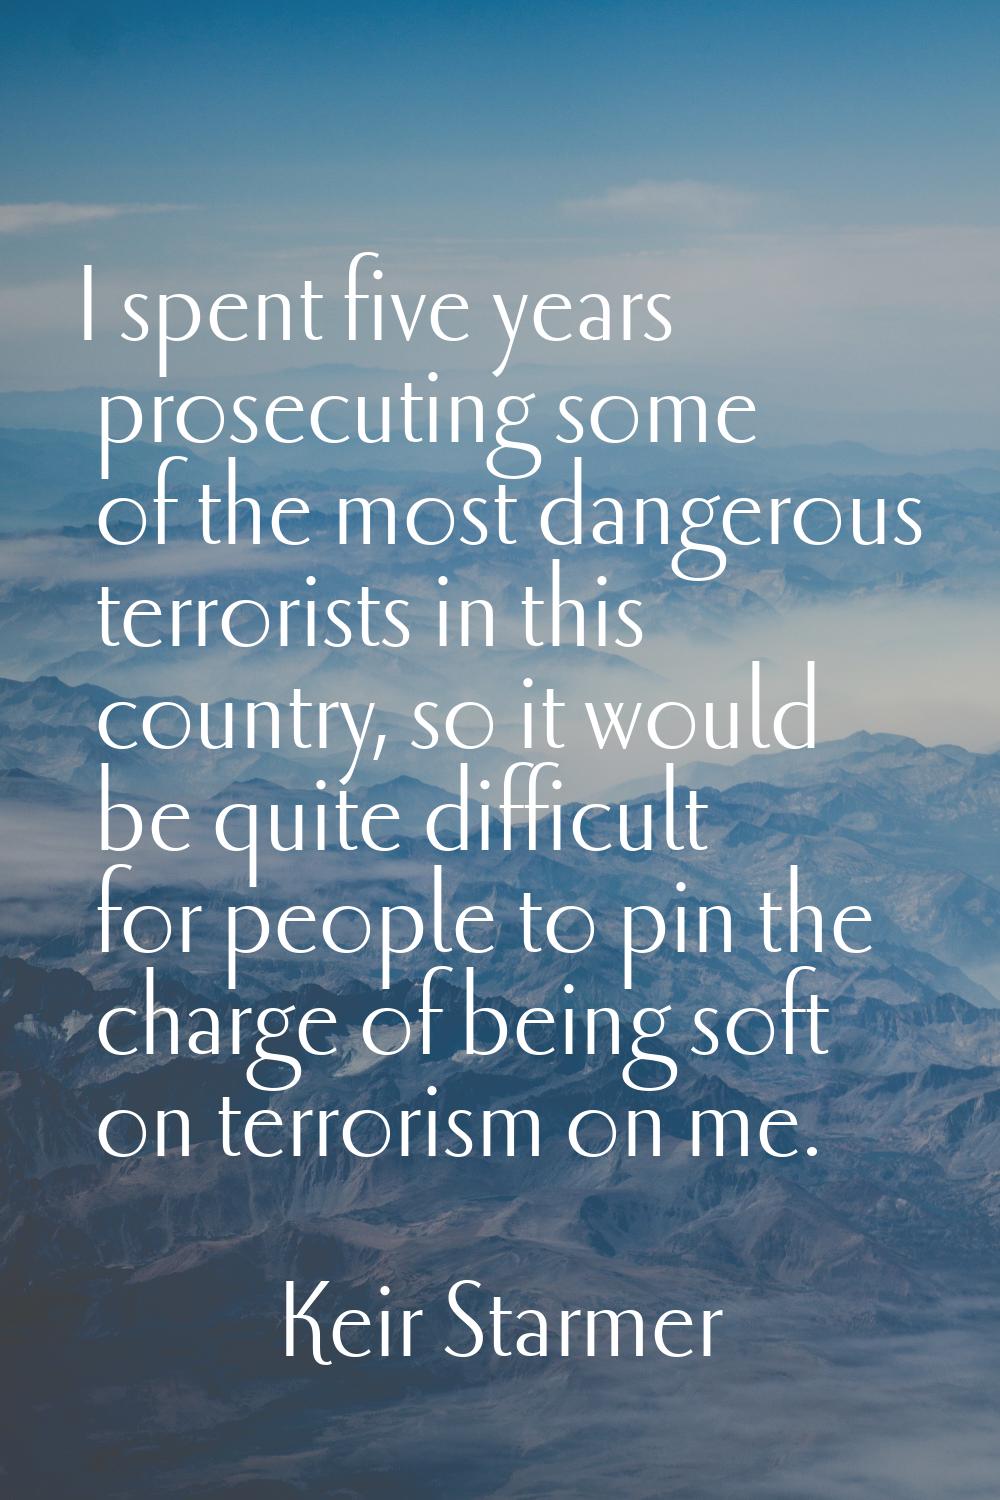 I spent five years prosecuting some of the most dangerous terrorists in this country, so it would b